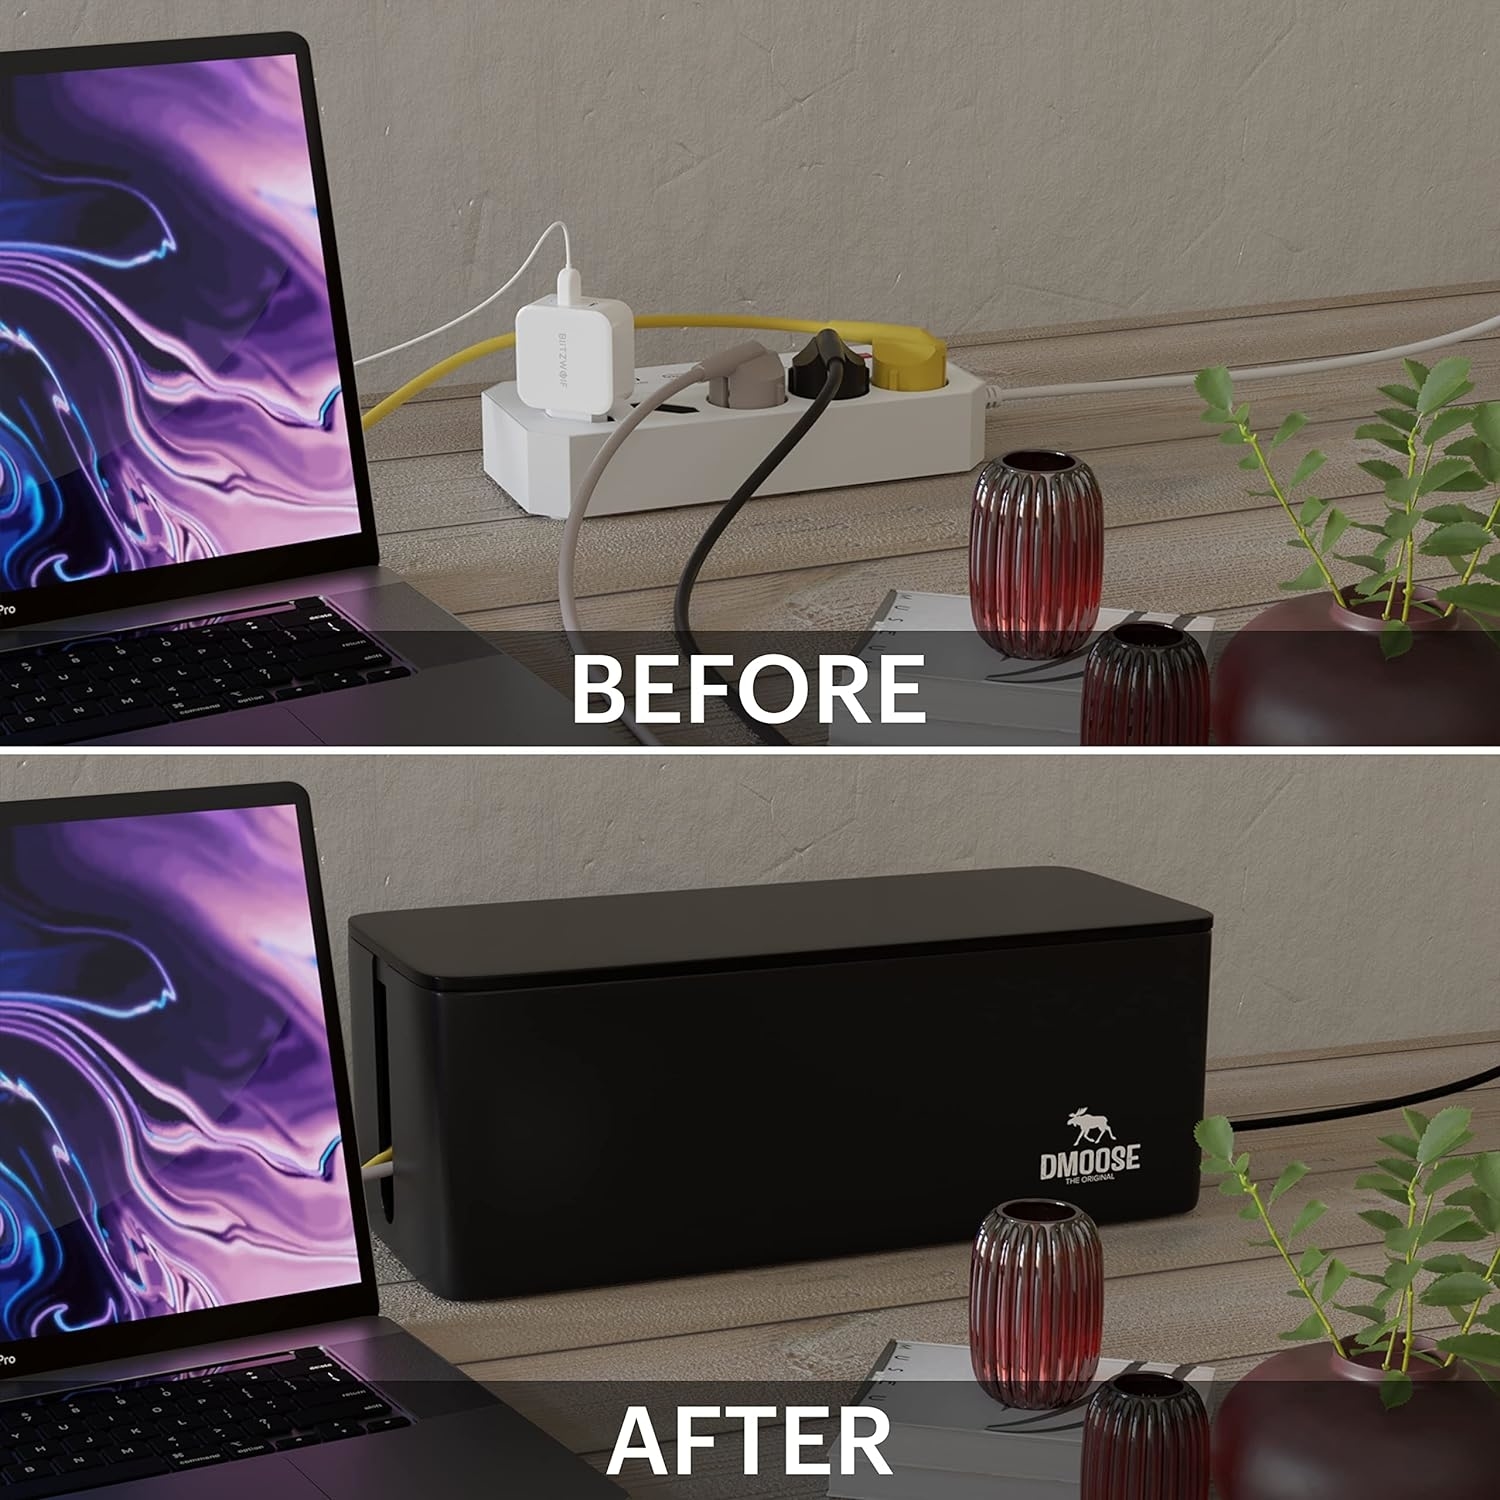 A before and after picture: on the top, a bunch of cords tangled on a desk and on the bottom, all those cords nicely disguised in a black box